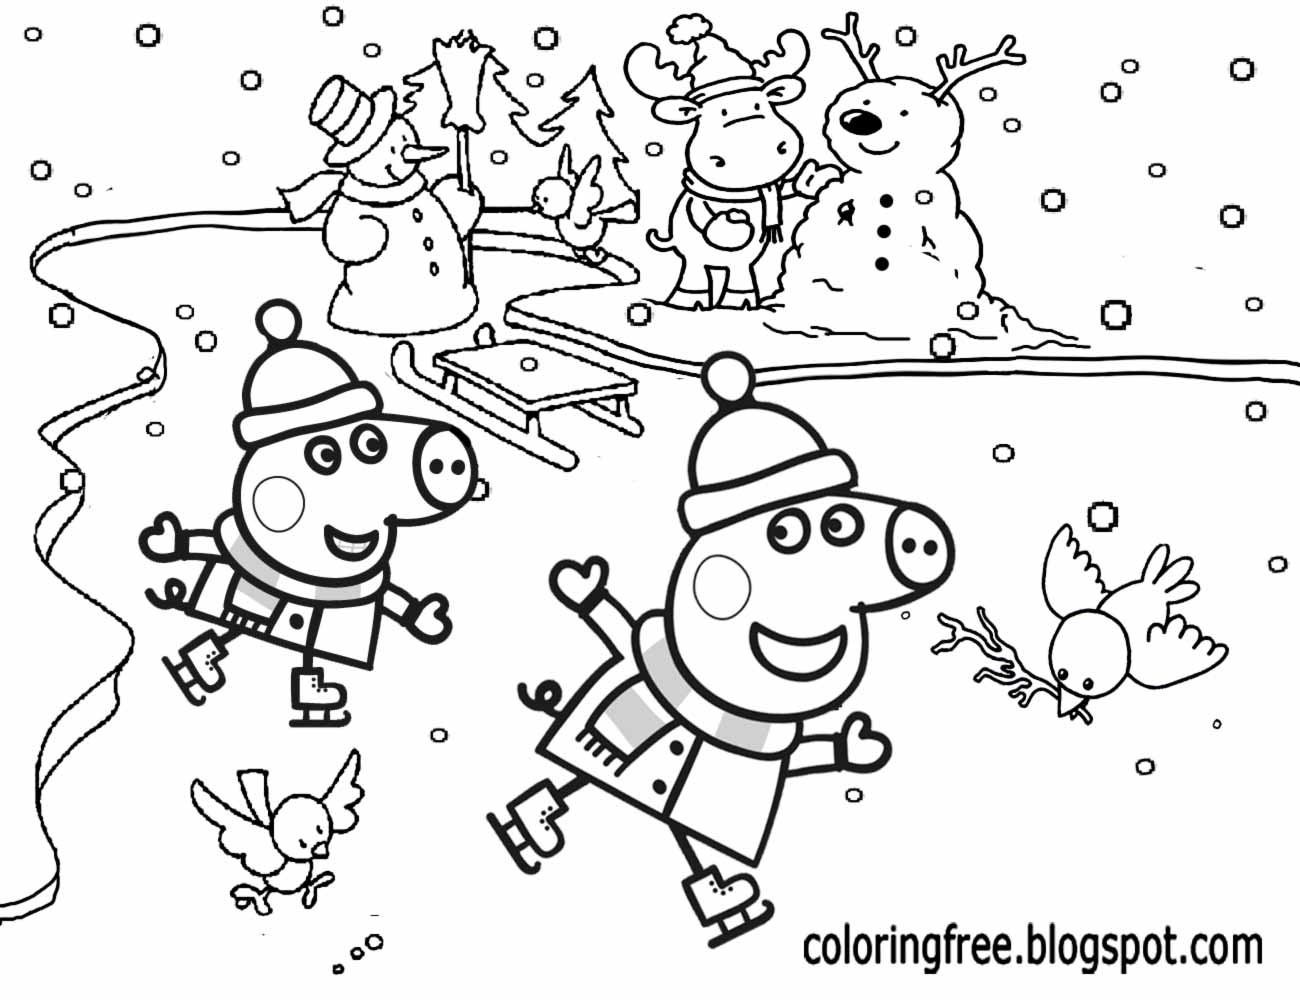 Free Coloring Pages Printable Pictures To Color Kids Drawing ideas:  February 2017